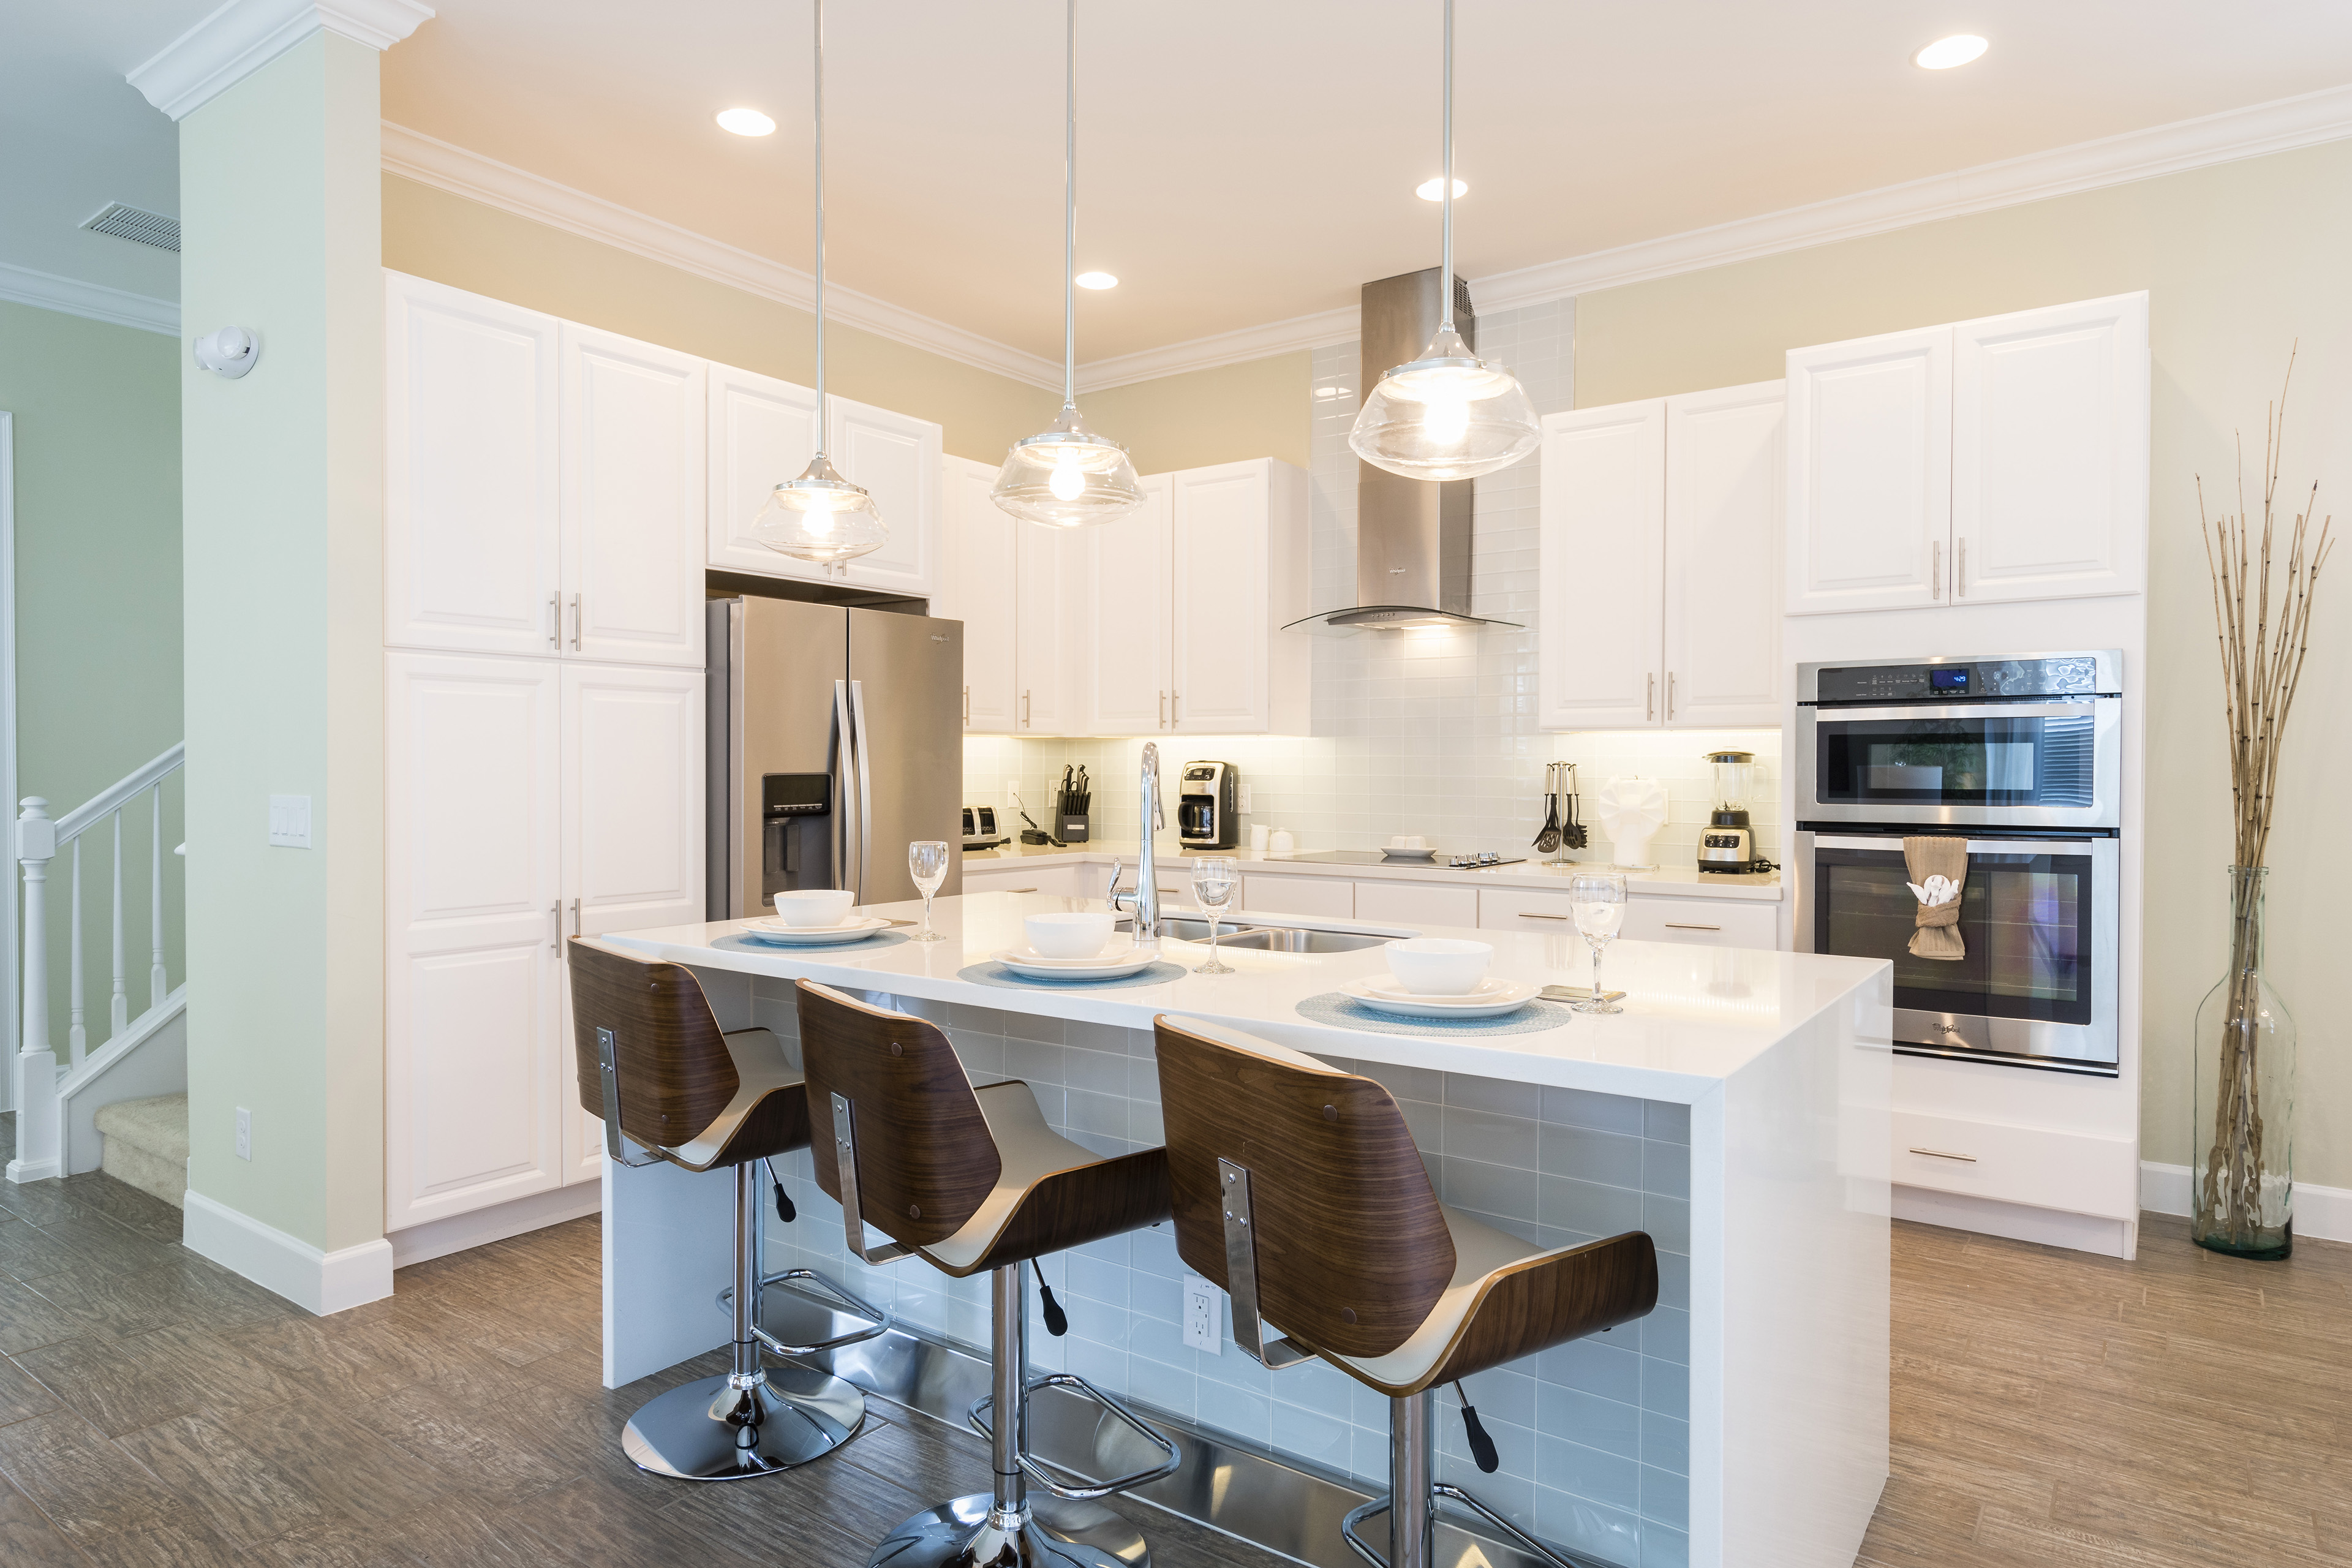 This modern kitchen with stainless appliances and breakfast bar comes fully equipped for any chef to be able to whip up their favorite meal